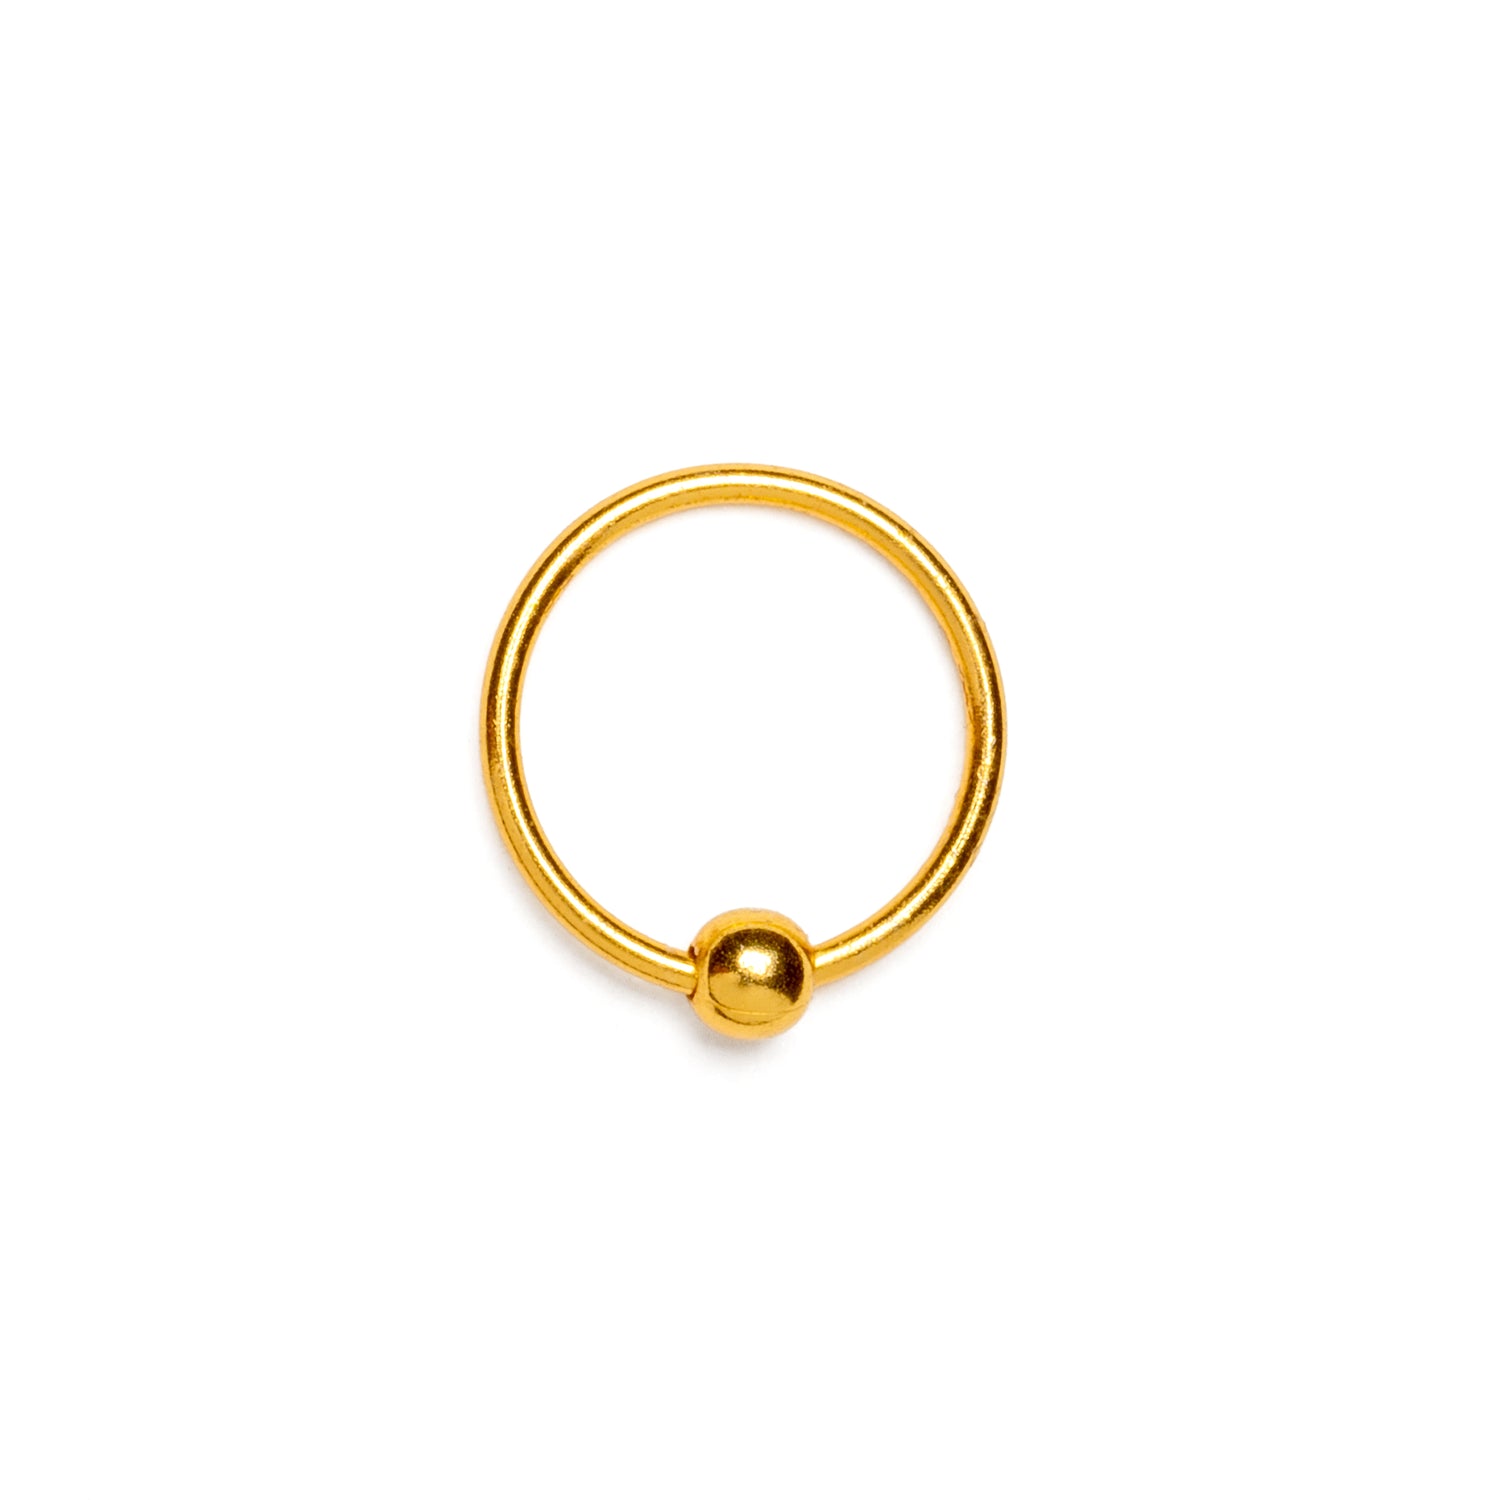 8mm Dhevan 18K Gold piercing ring with ball closure frontal view